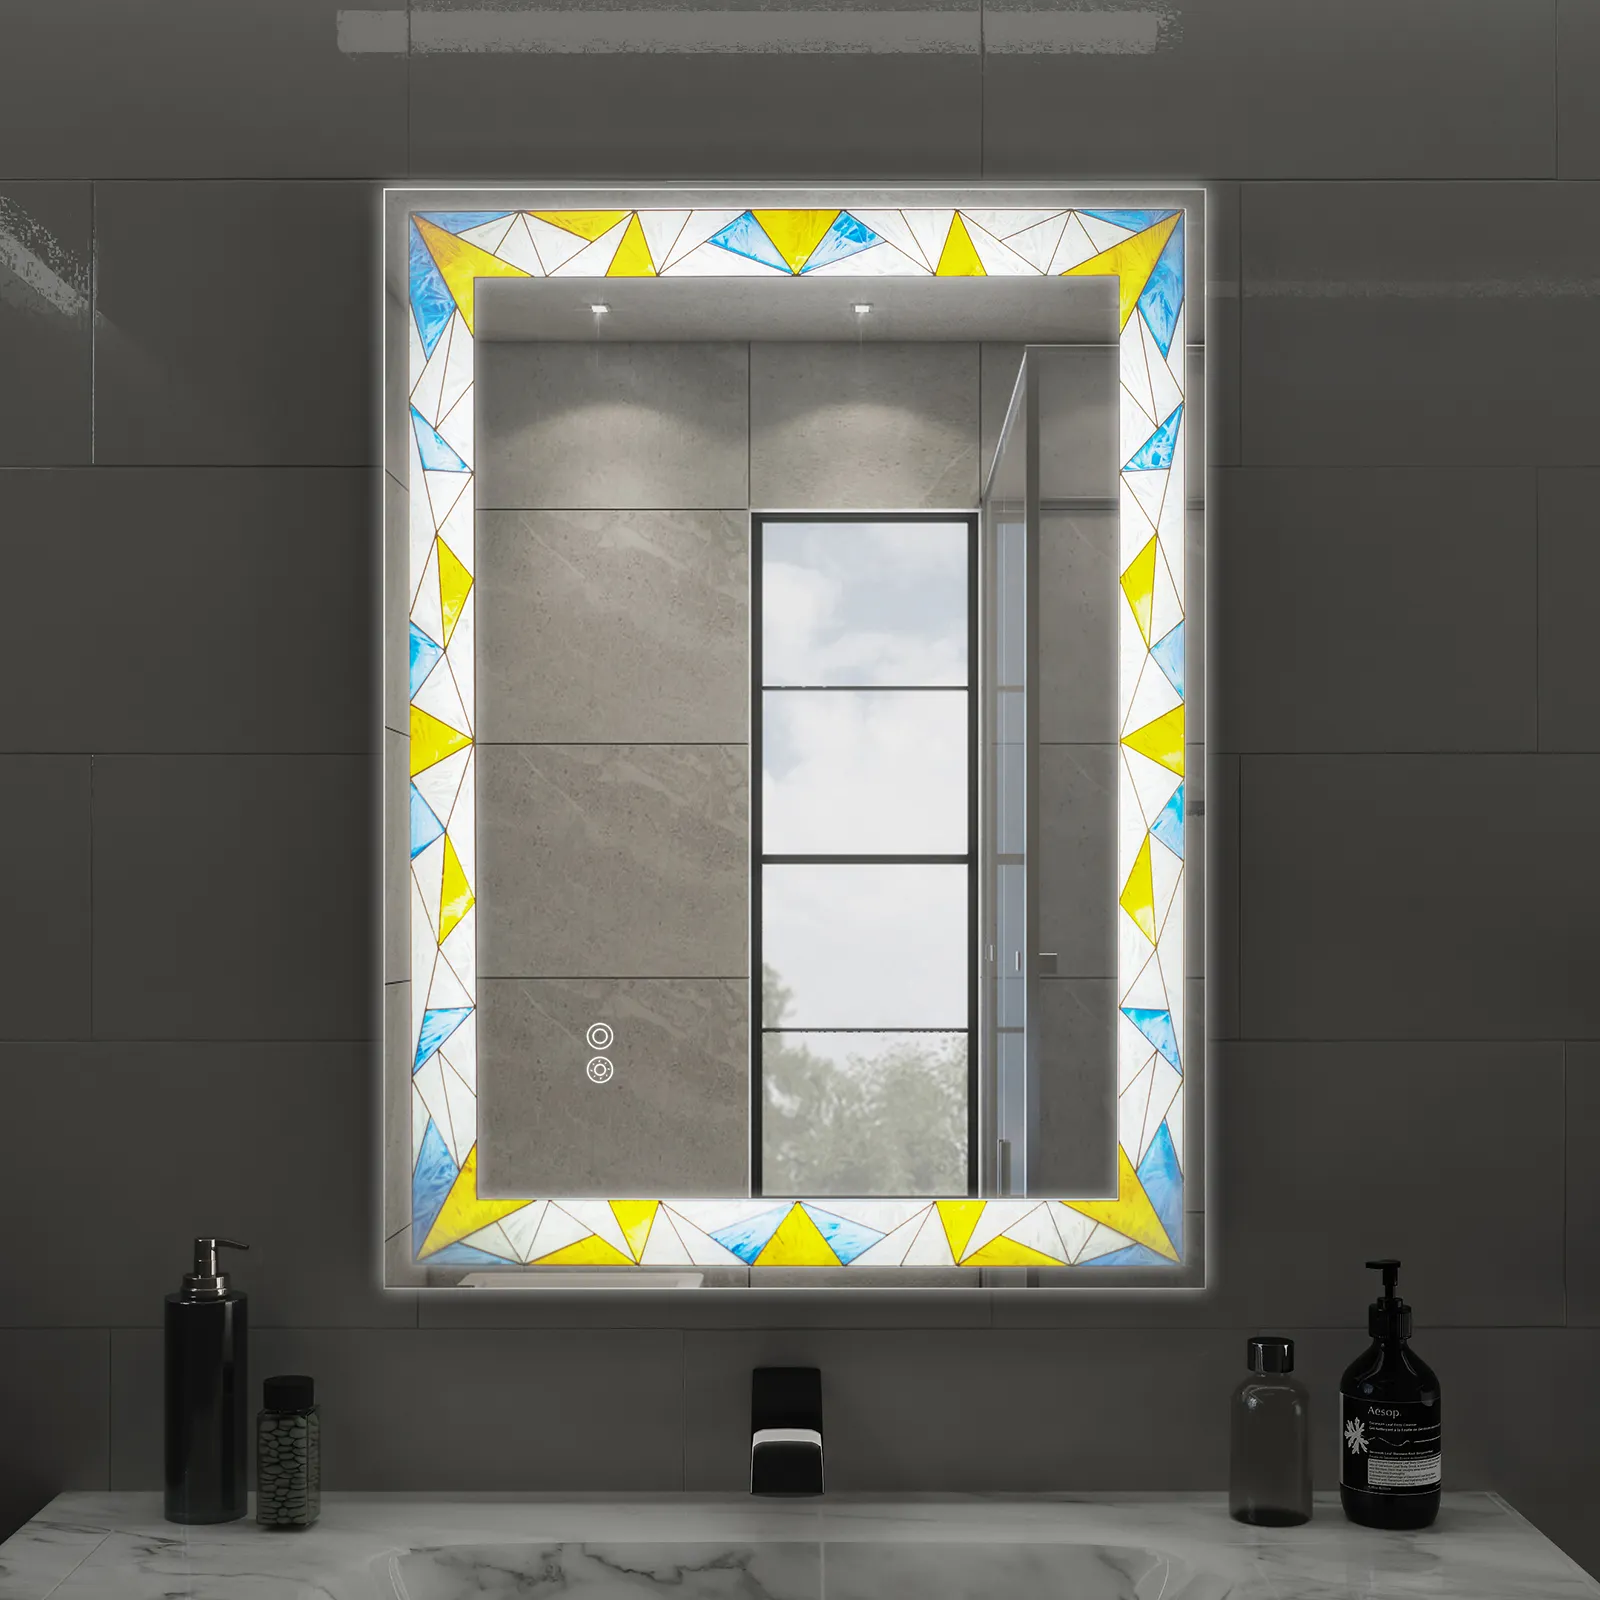 2022 New Led Bathroom Vanity Mirror Customized Your Own Lighting Area Pattern Smart Modern Bath Vanity Wall Mirror with Light